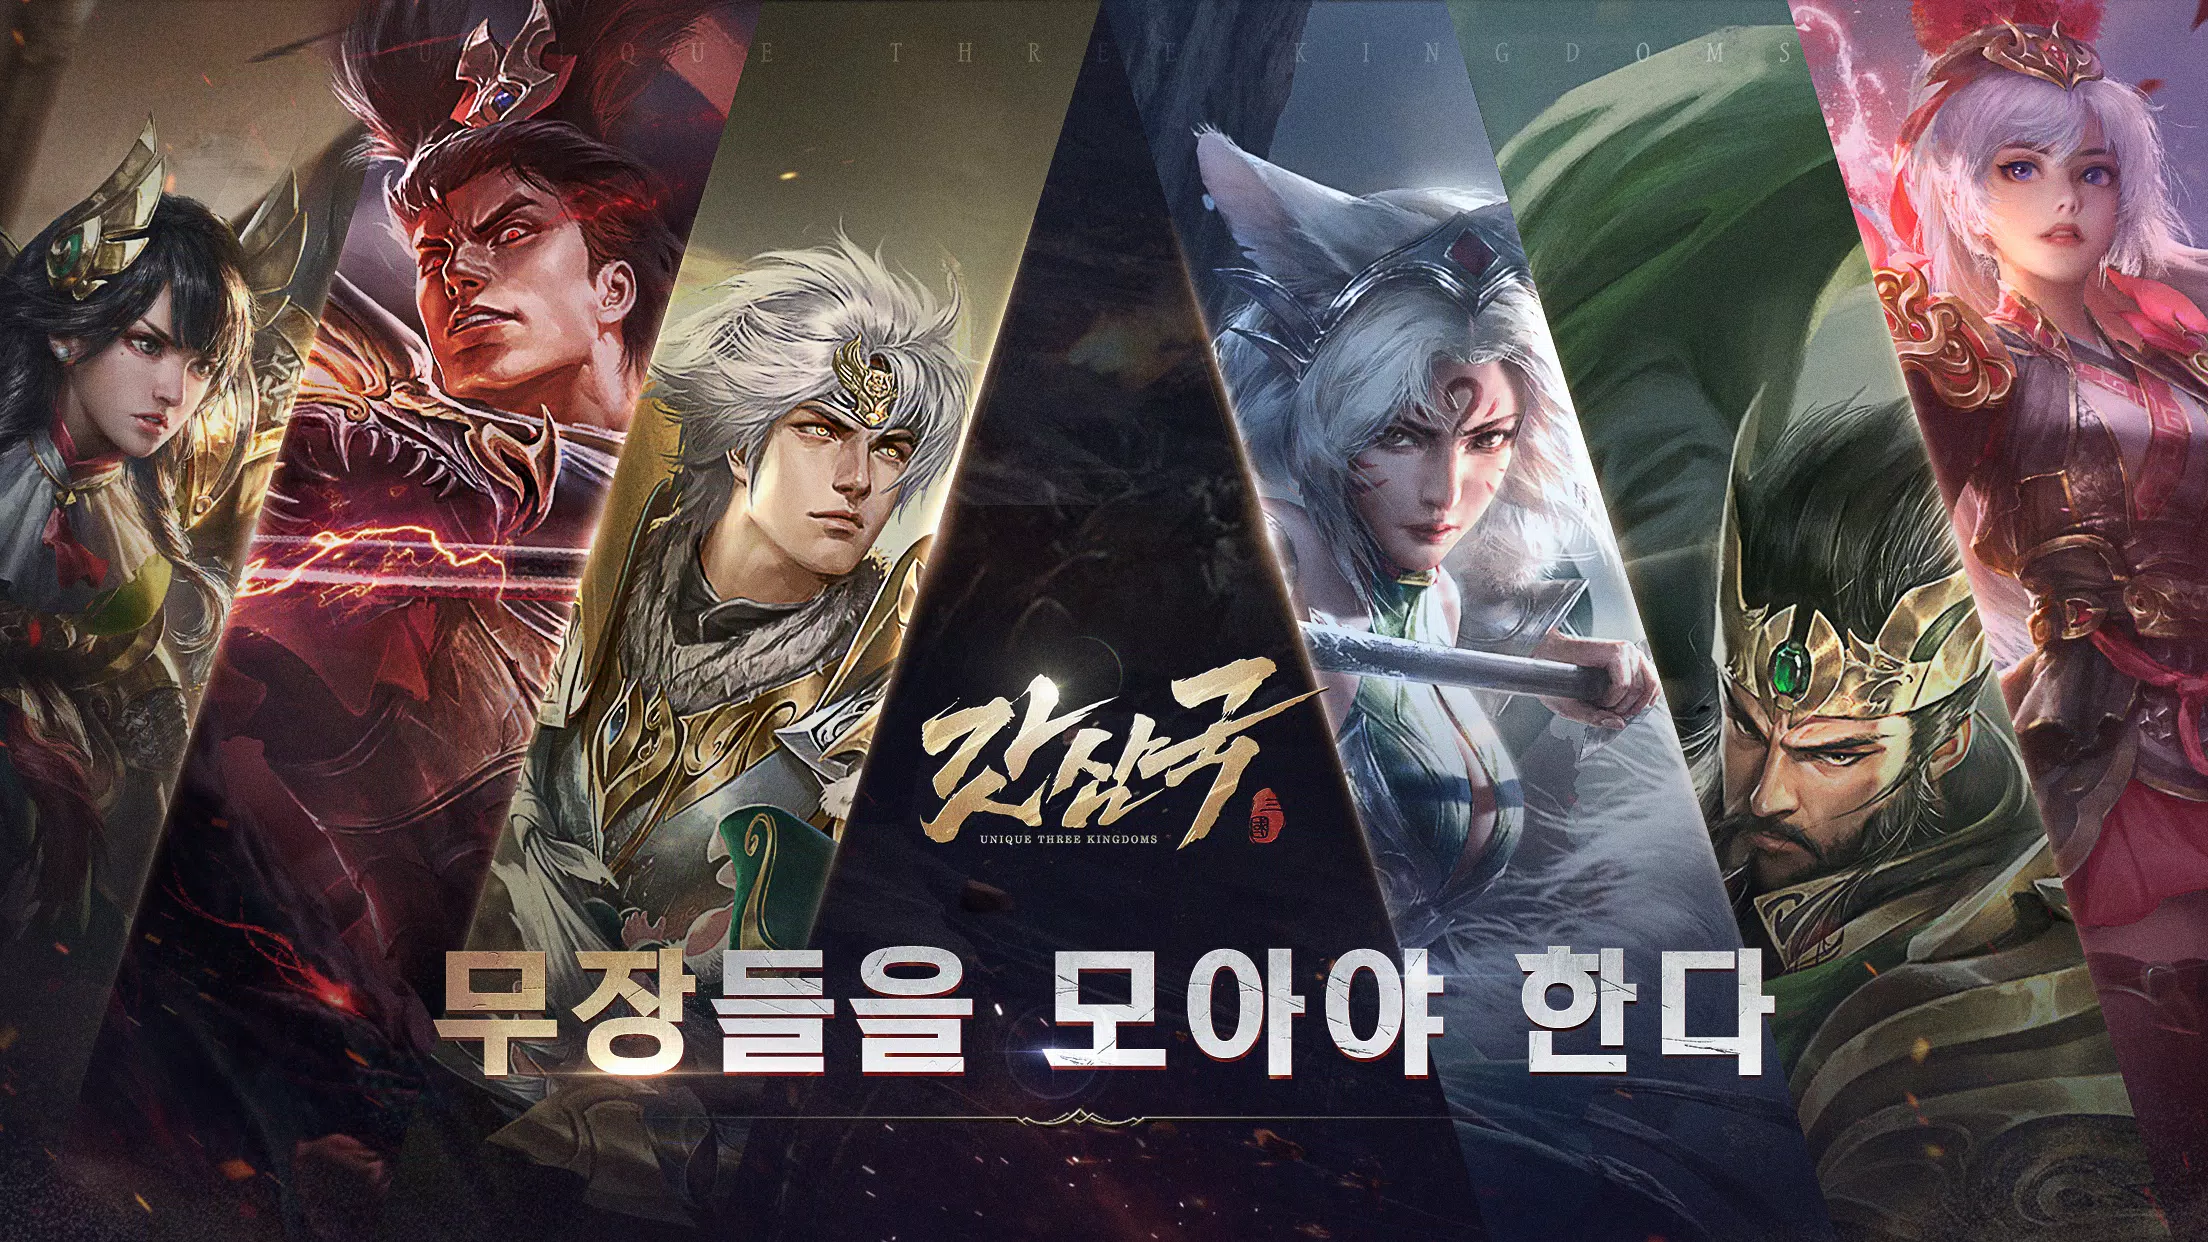 Android / iOS Gaming PH - GRAND SAGA MOBILE (KOREA/BETA) 2021 Newest Online  Korean-RPG with Unreal-Engine Are Now Pre Download, Server Will be Open  Tomorrow Jan 26 Download APK From Apkpure To